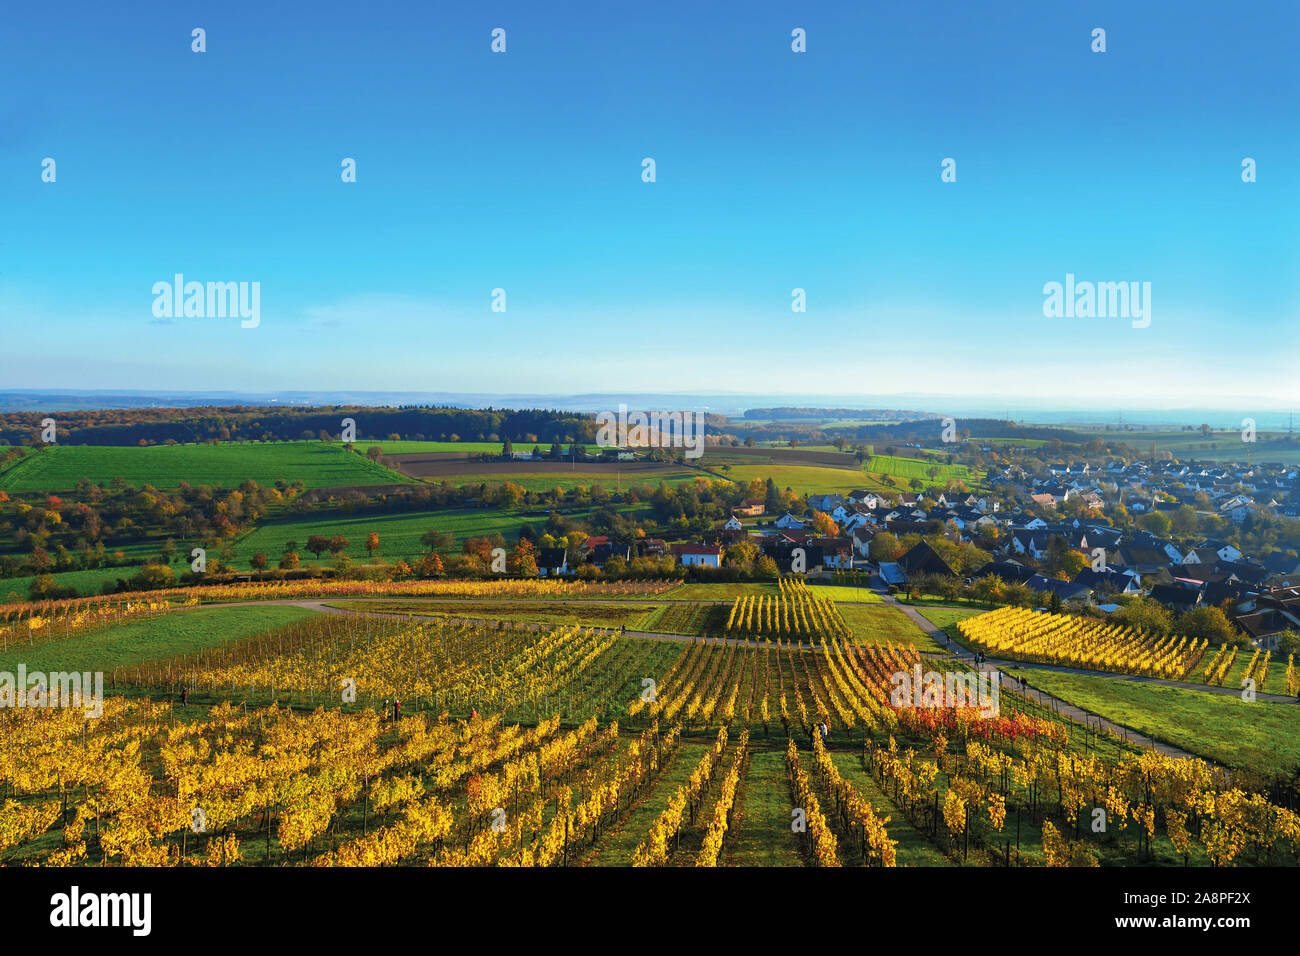 View over 'Kraichgau',  a hilly region in  southwestern Germany in Autum with grapevinen with yellow leaves Stock Photo